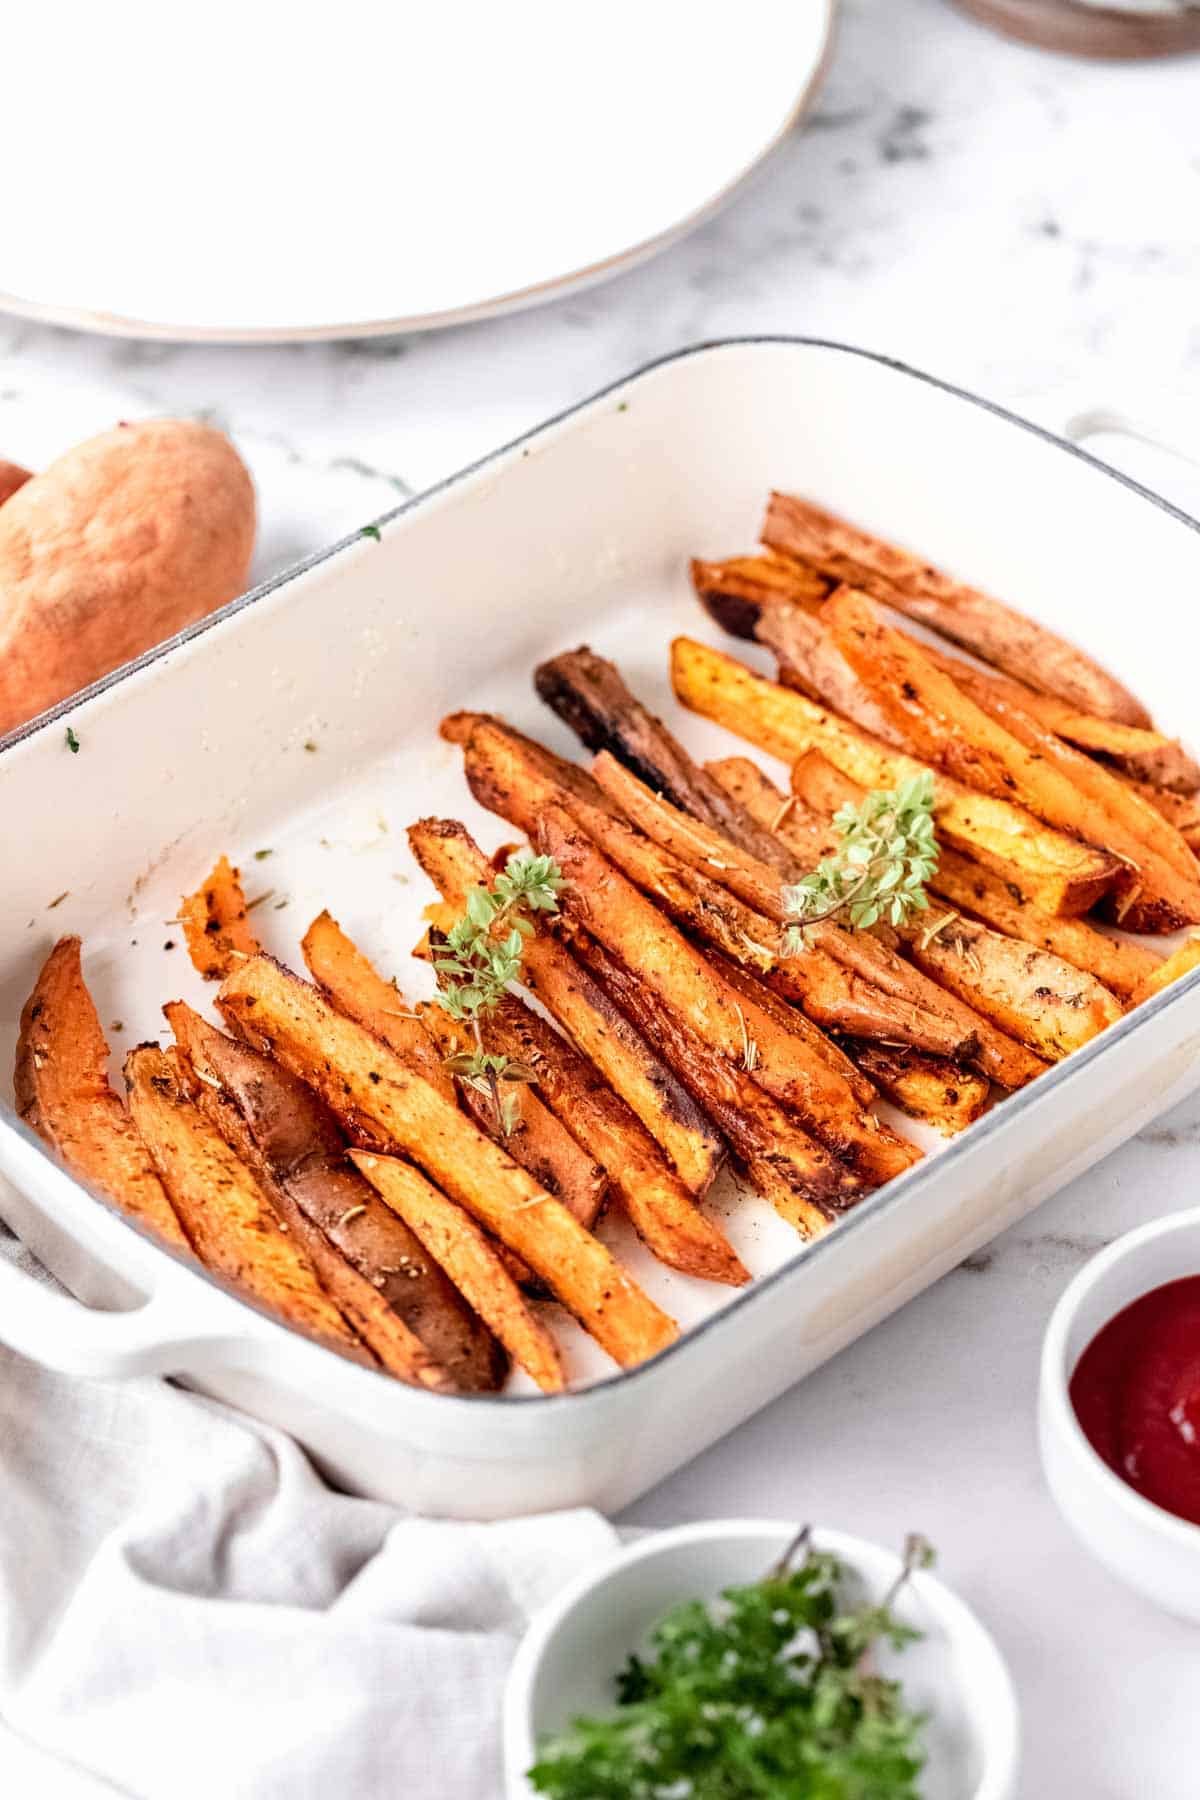 Herbes de Provence baked sweet potato fries in a white ceramic baking dish, surrounded by bowls of seasoning.